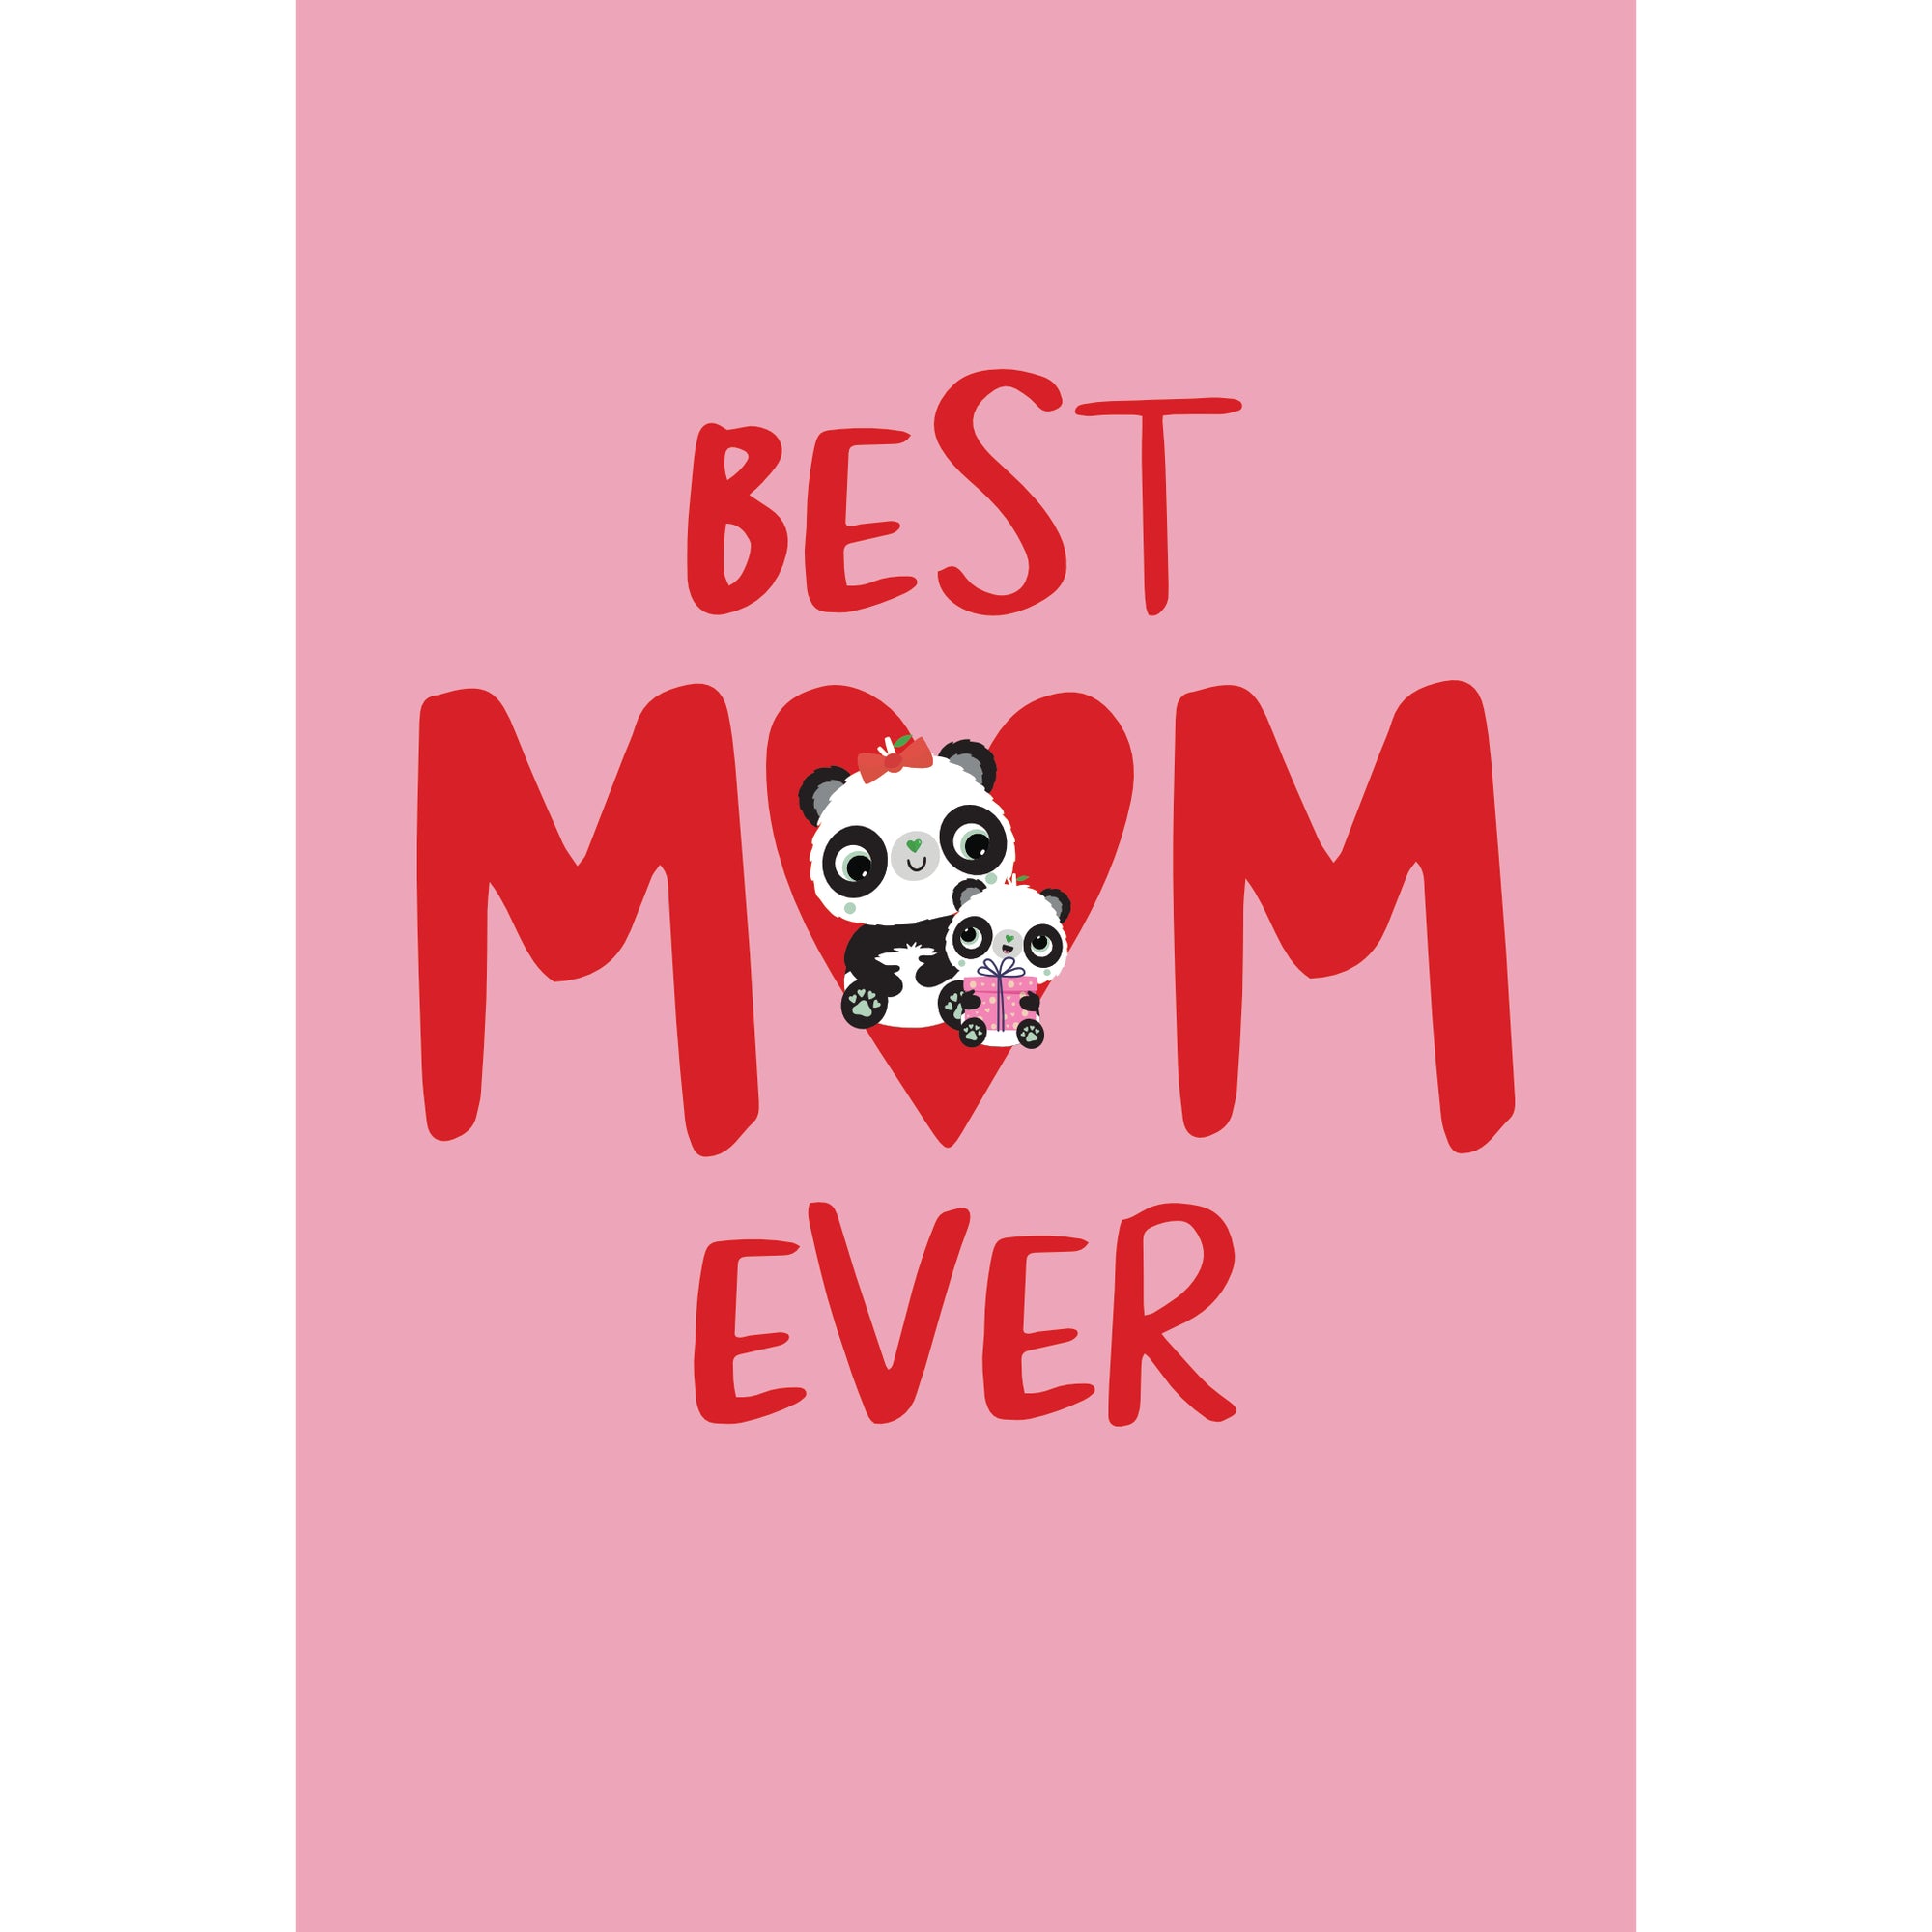 Best MUM Ever! | A6 Eco Friendly Mother's Day Cards | Panda Joy